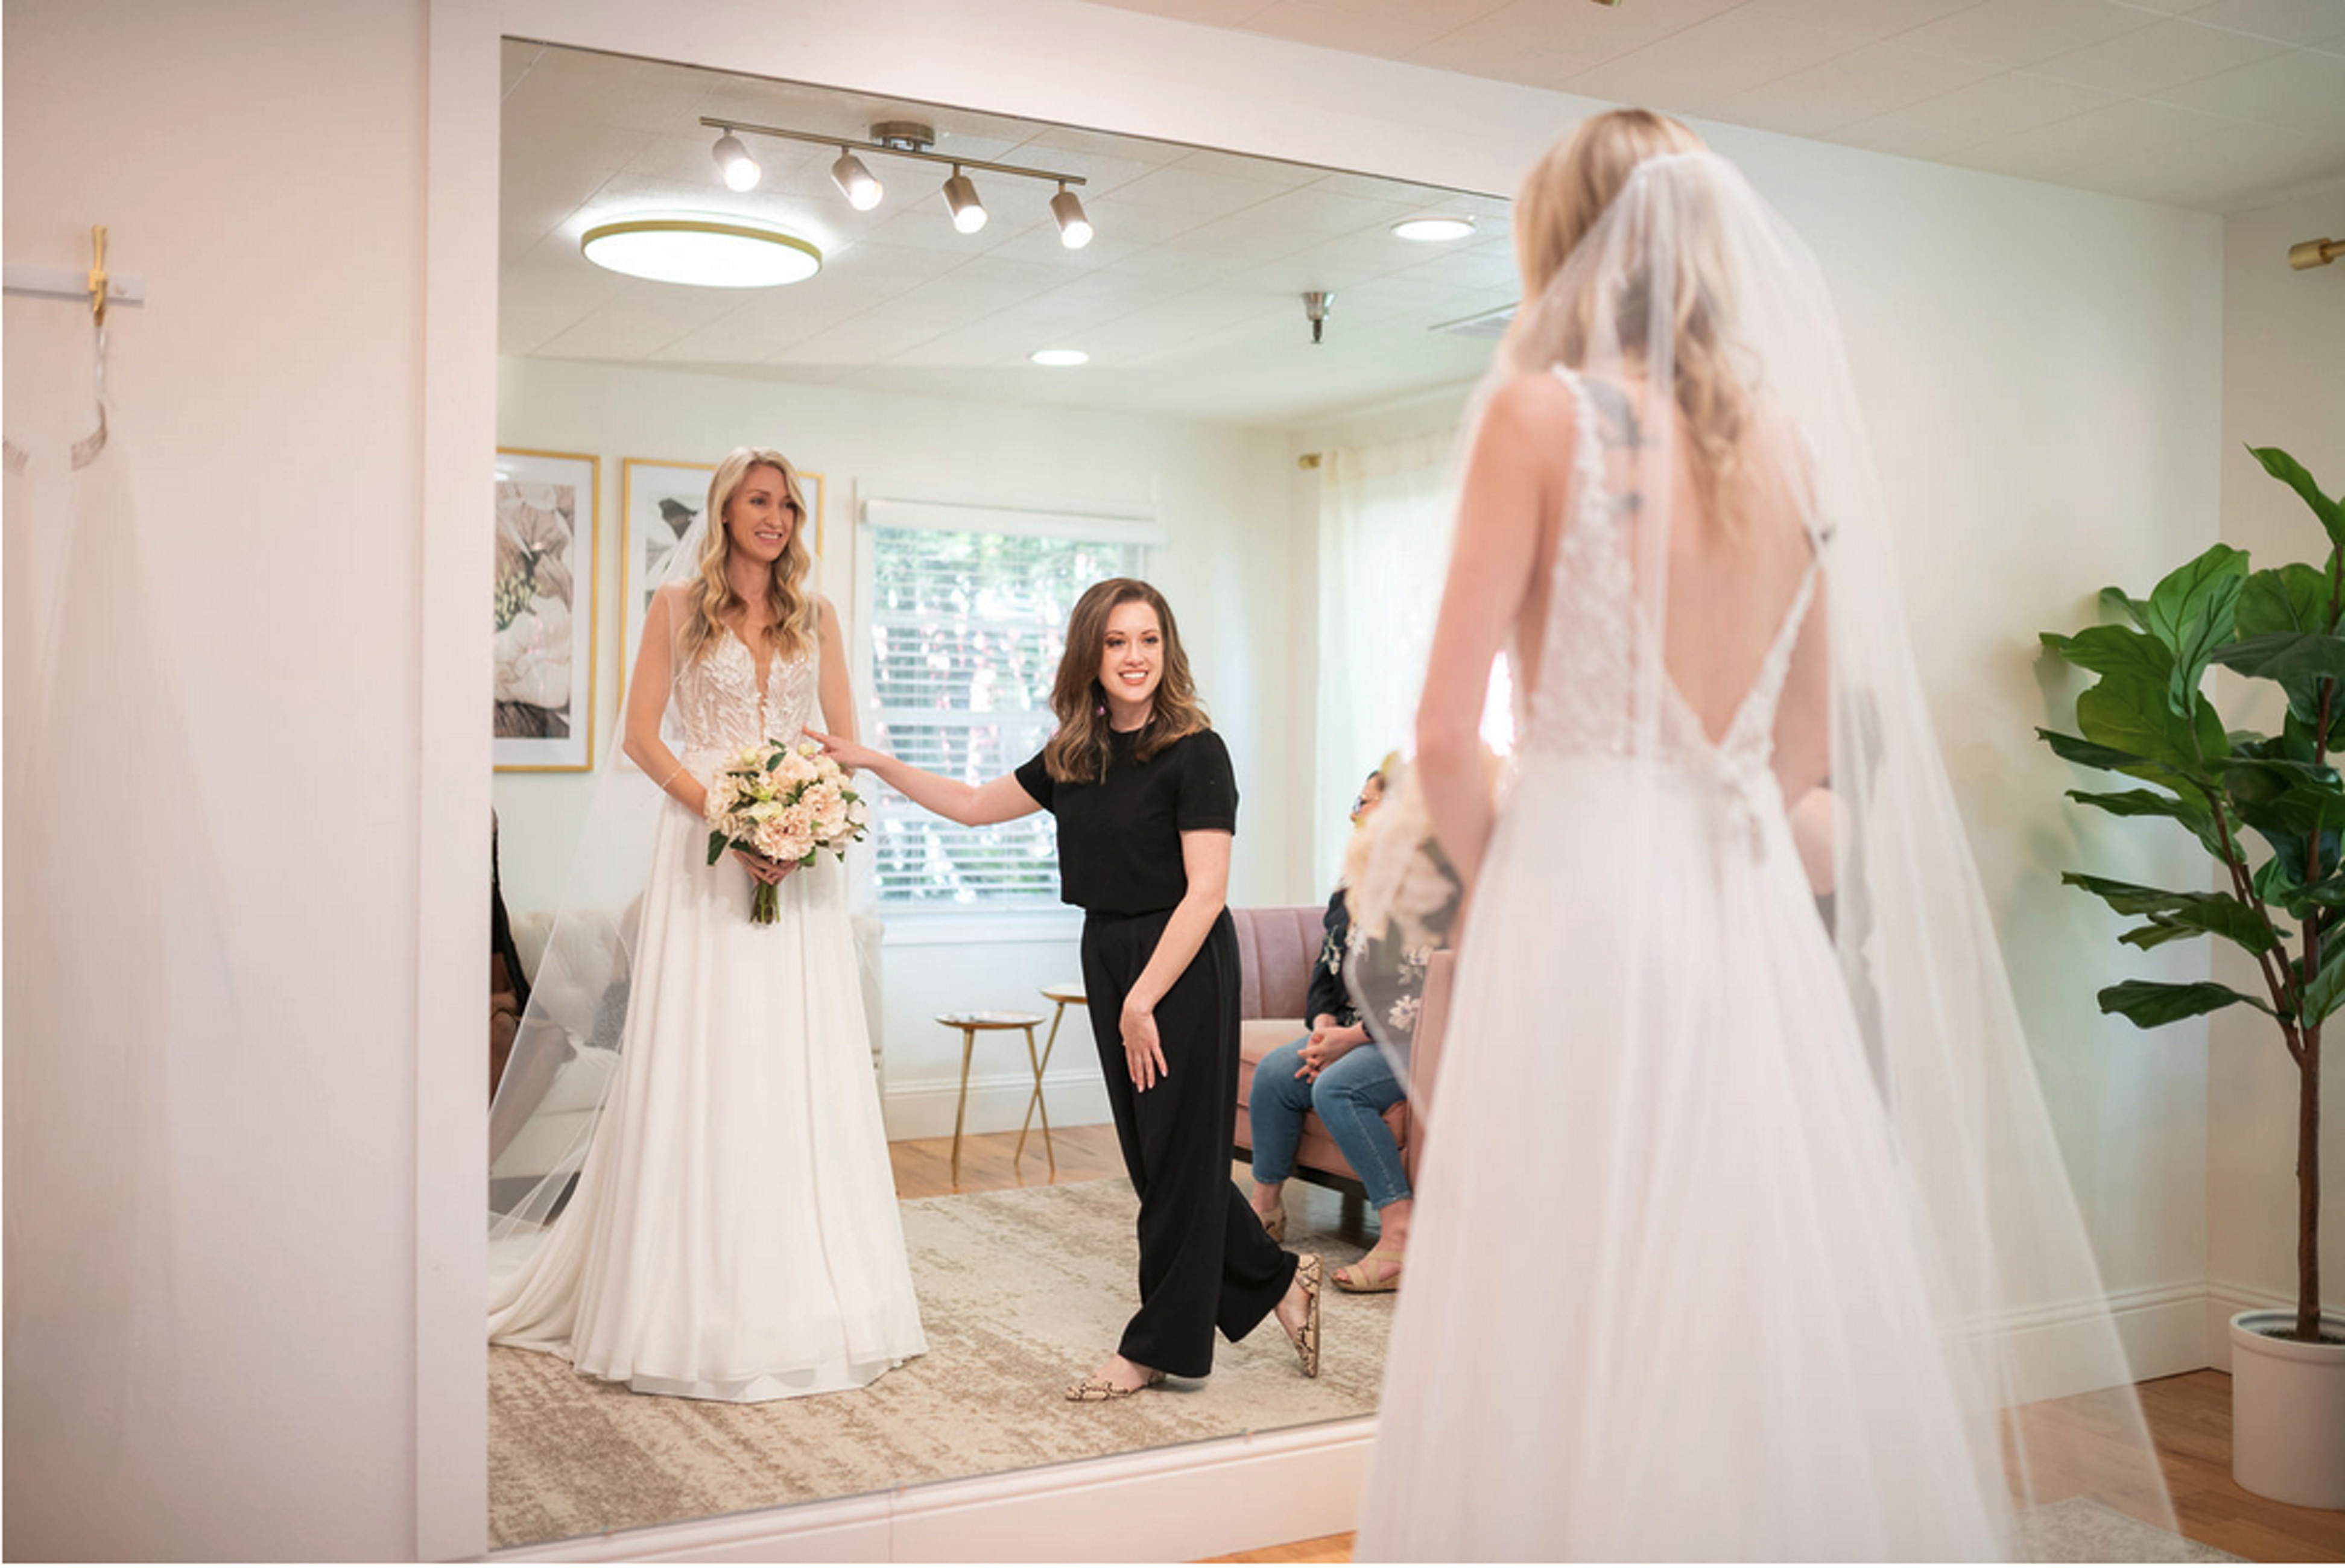 Bride admiring herself in the mirror with her Stylist by her side